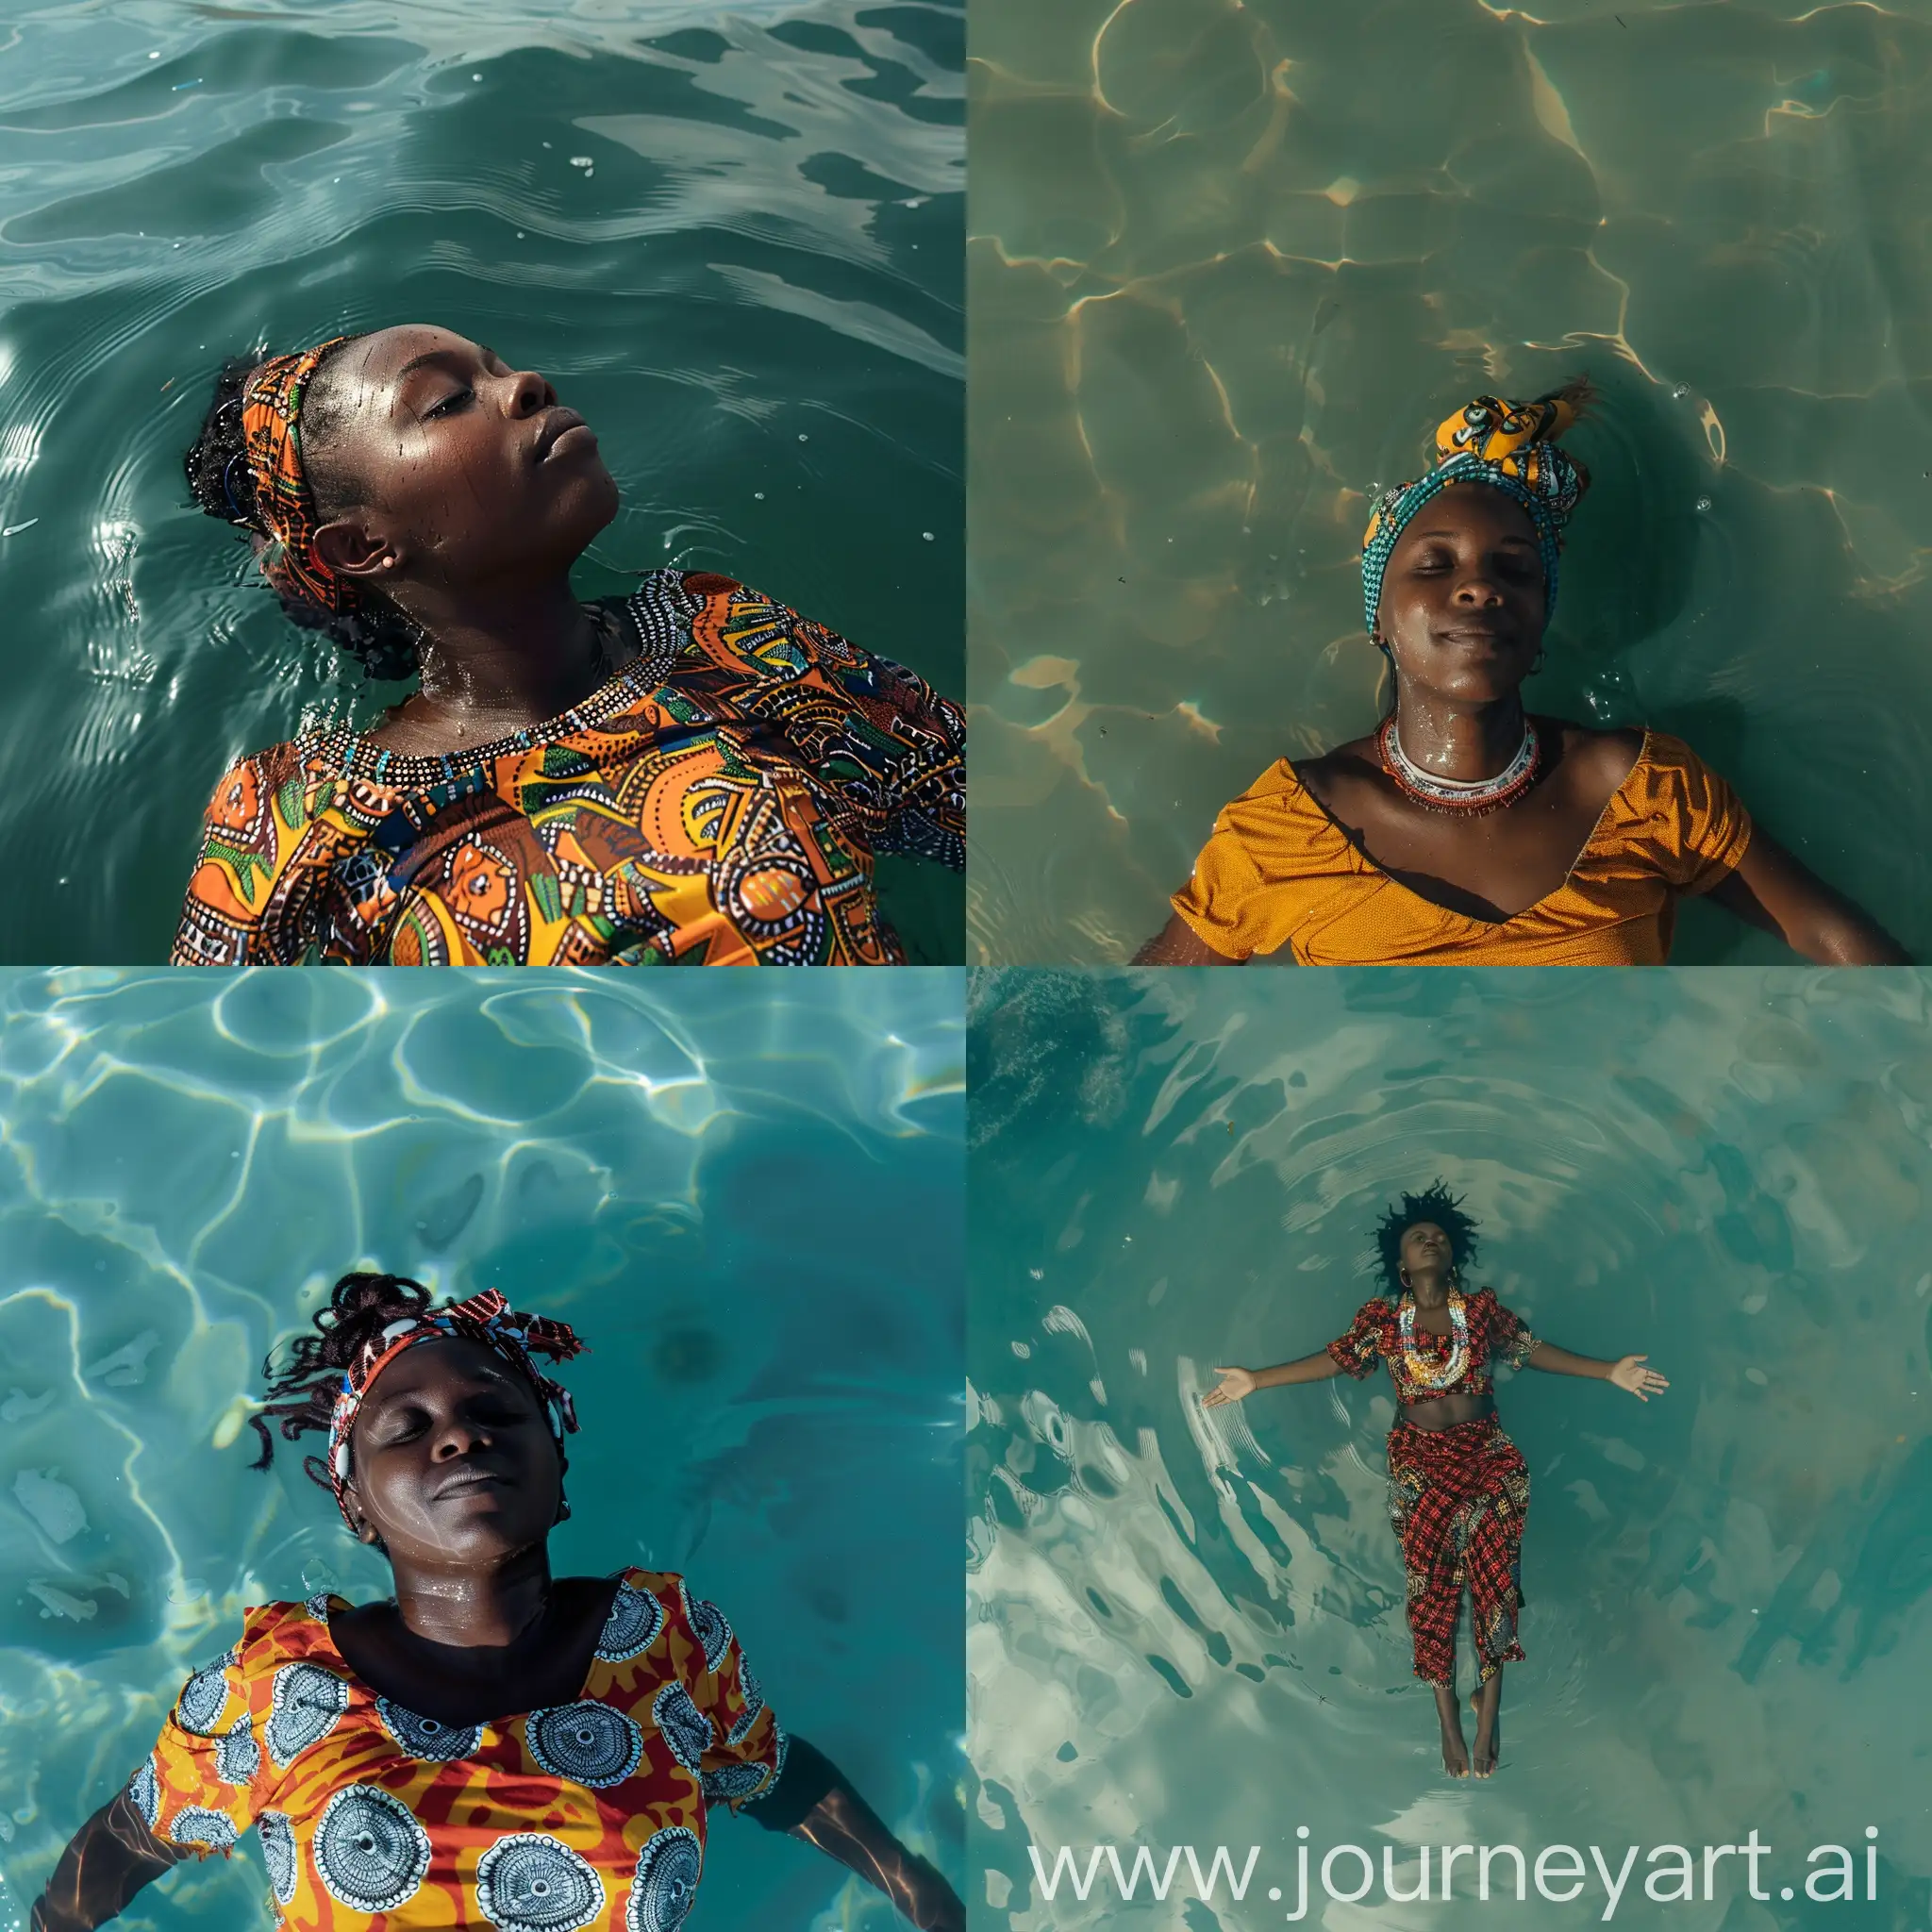 Upclose erial view of an African woman floating on water On a sunny day.